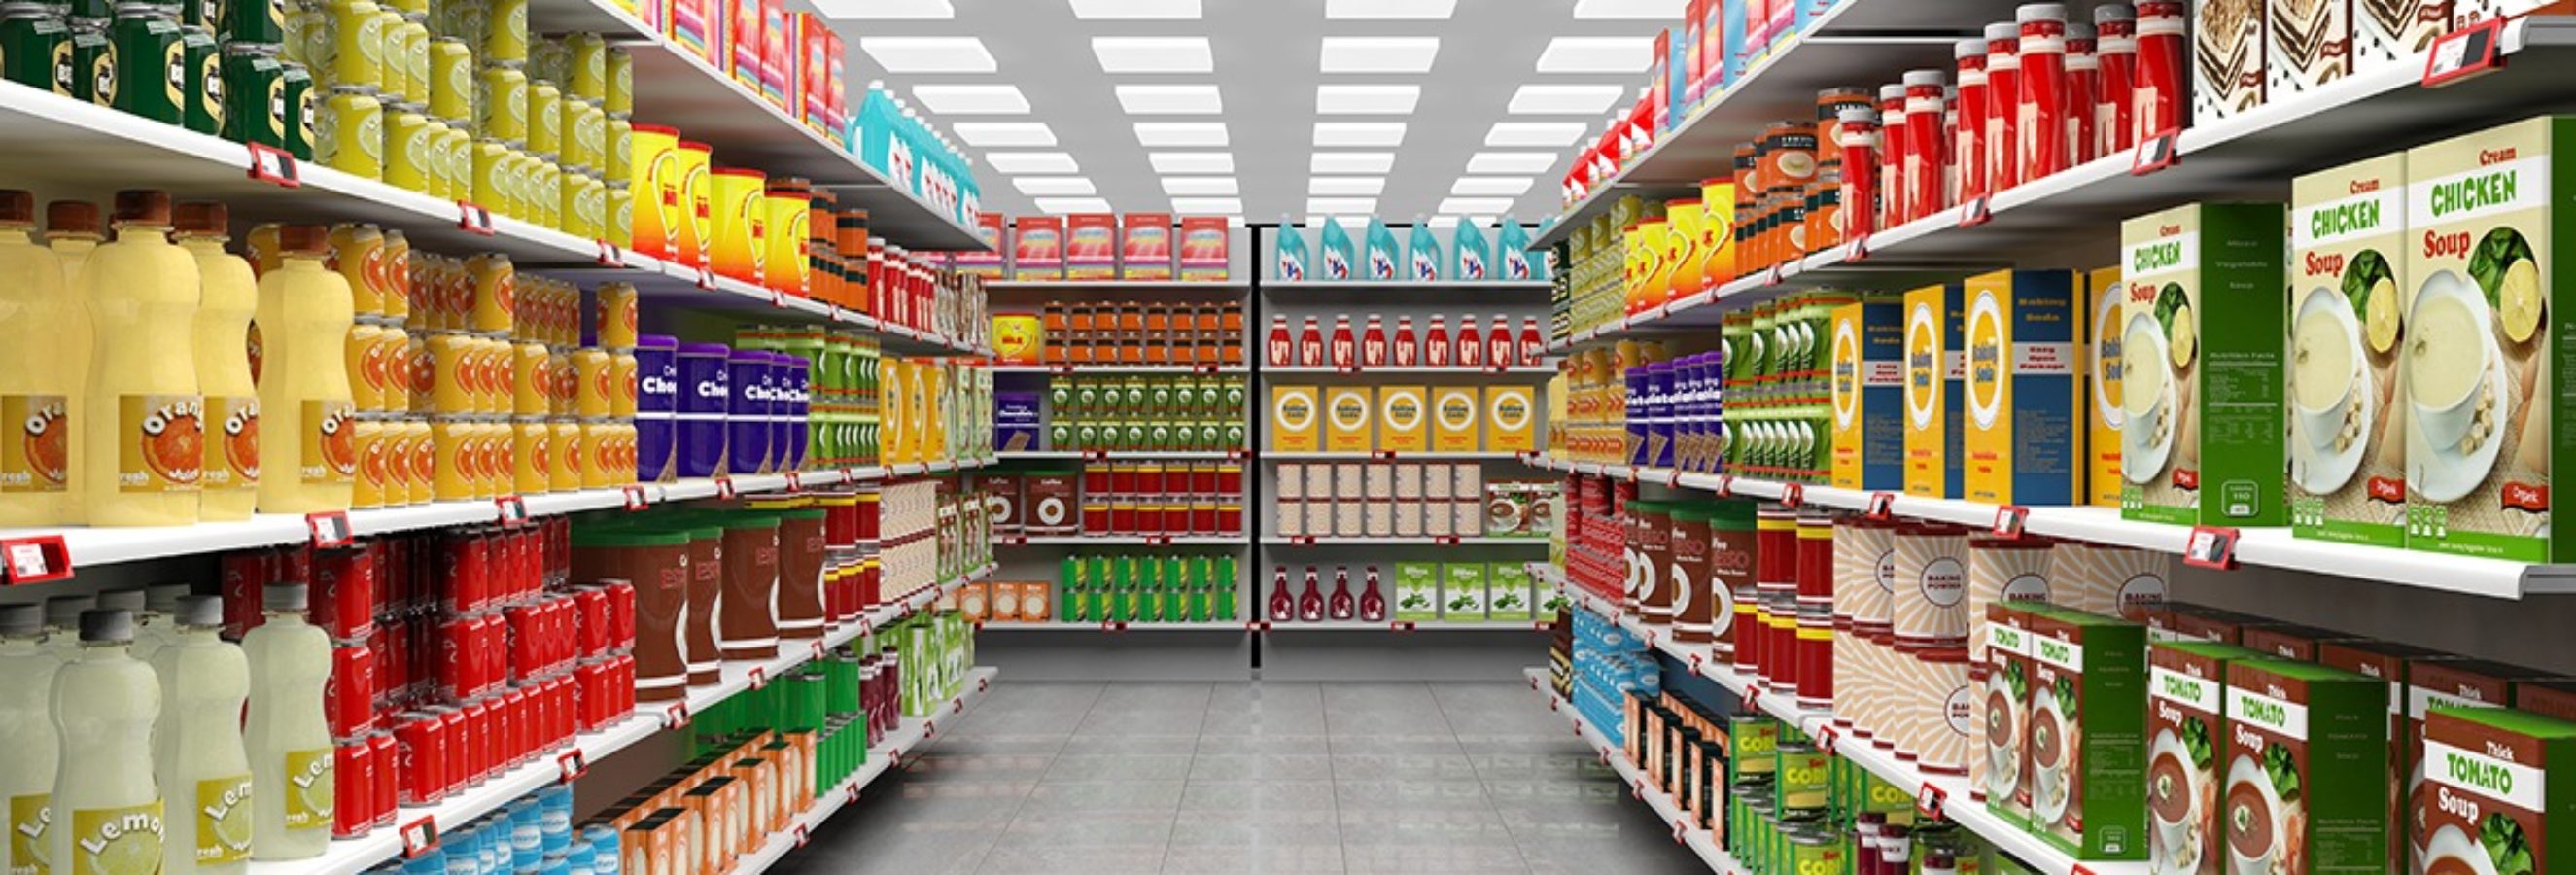 virtual supermarket interior with shelves full of various products